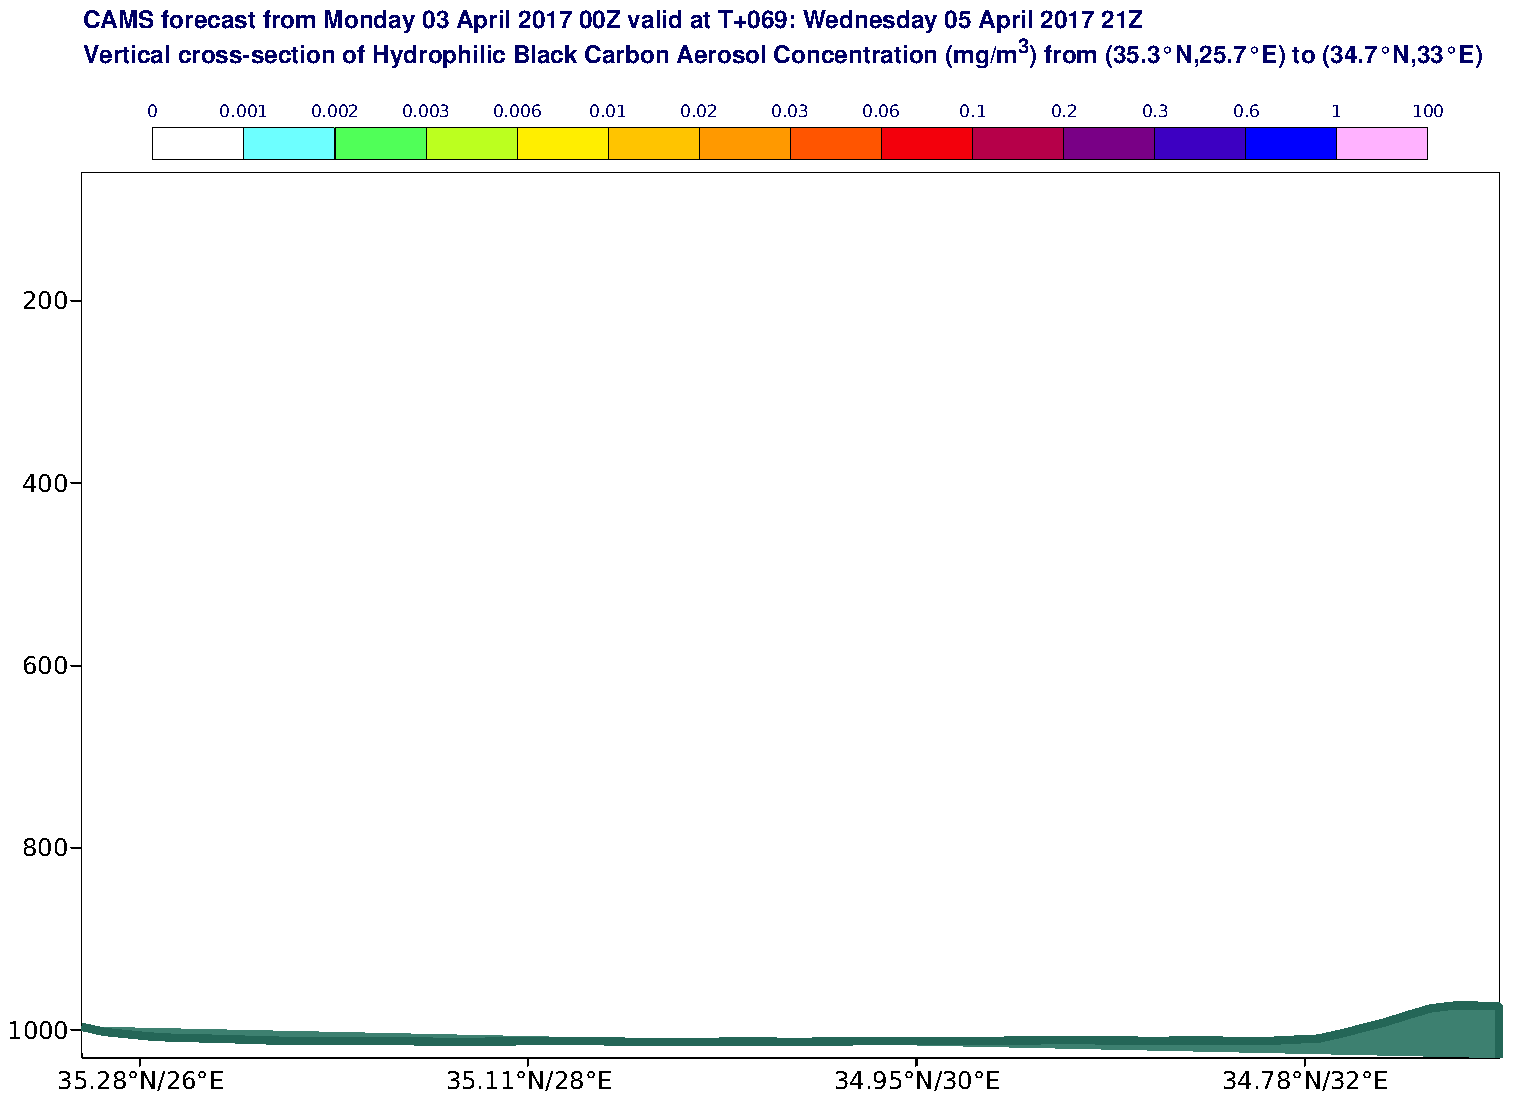 Vertical cross-section of Hydrophilic Black Carbon Aerosol Concentration (mg/m3) valid at T69 - 2017-04-05 21:00